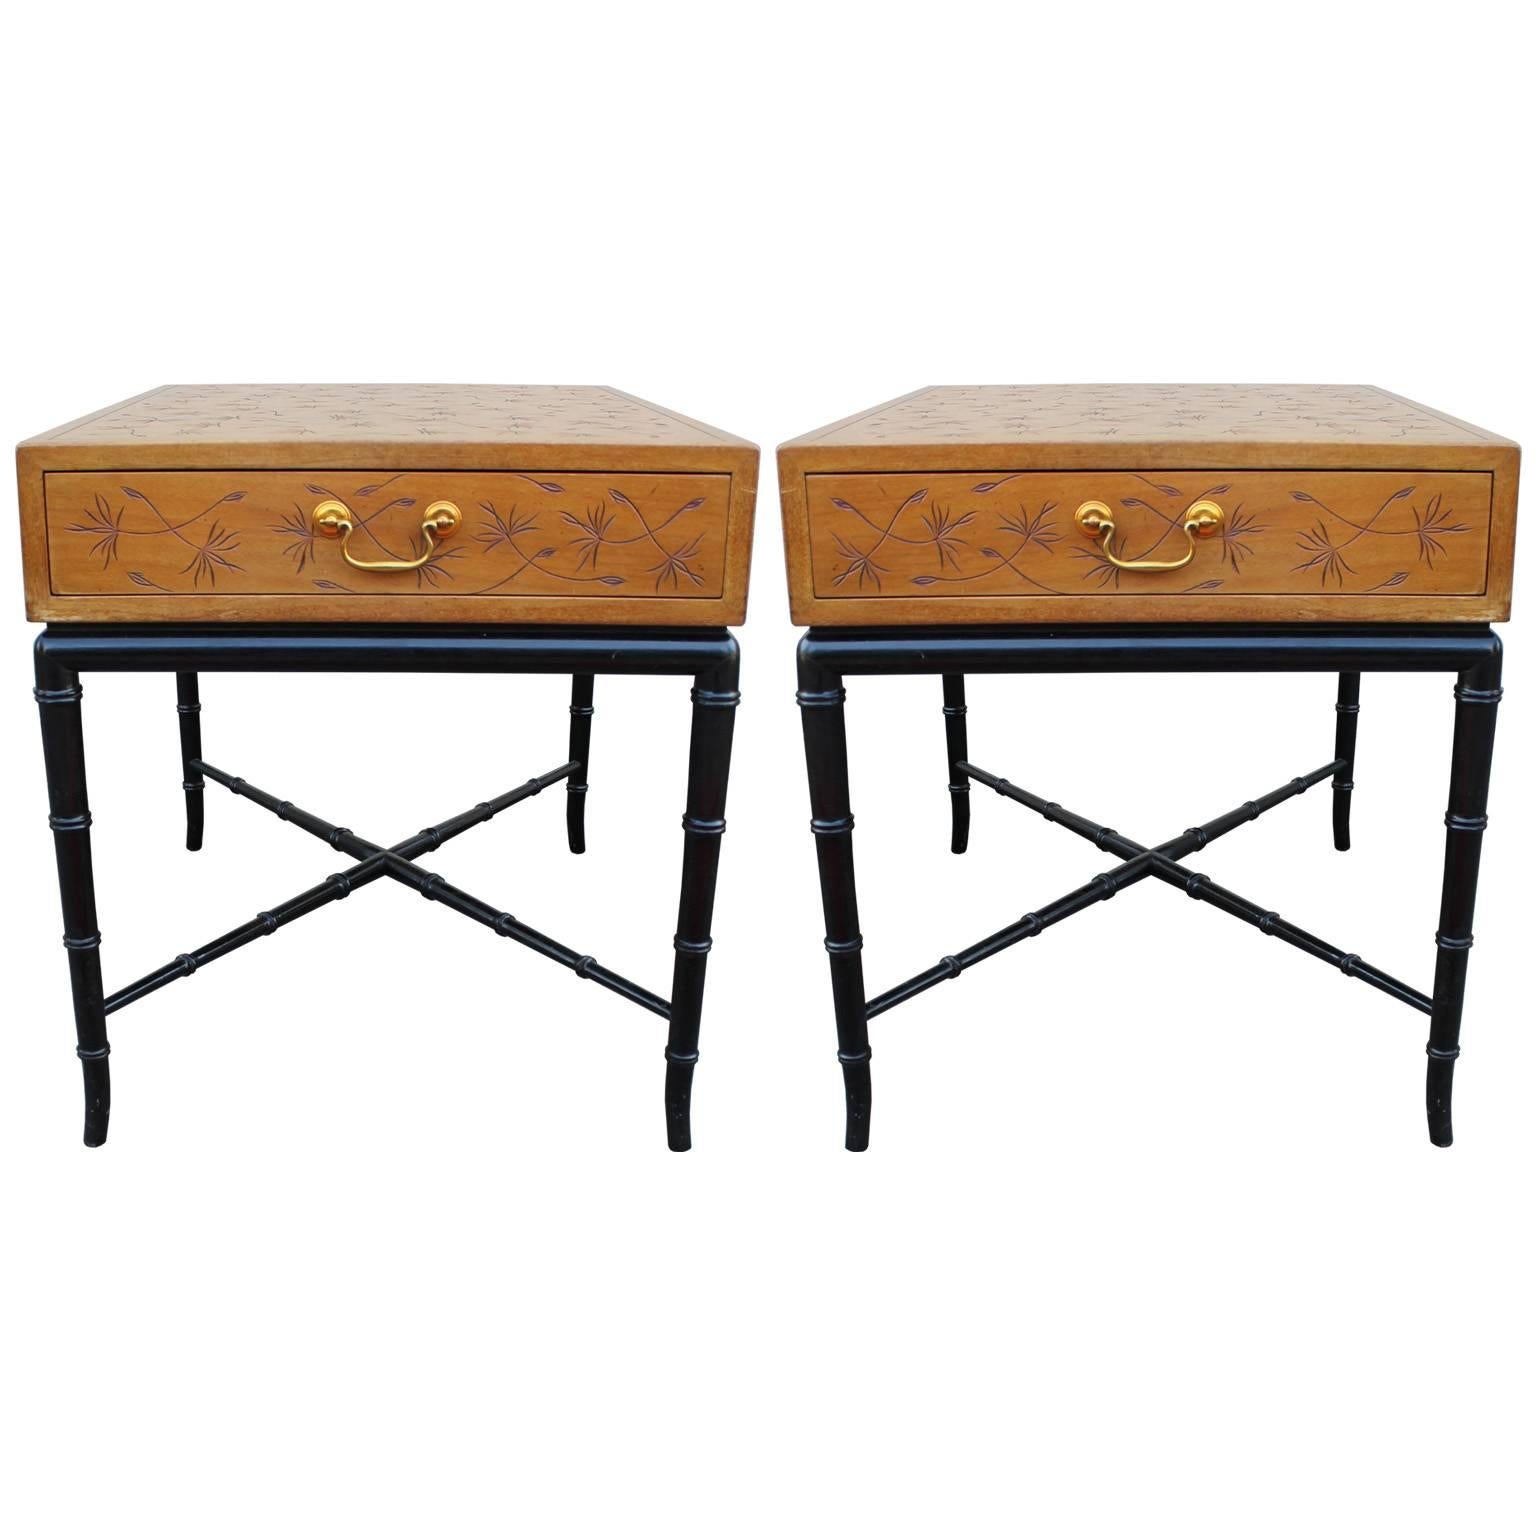 Pair of Incised Kittinger Modern Side Tables / Nightstands with Faux Bamboo Legs